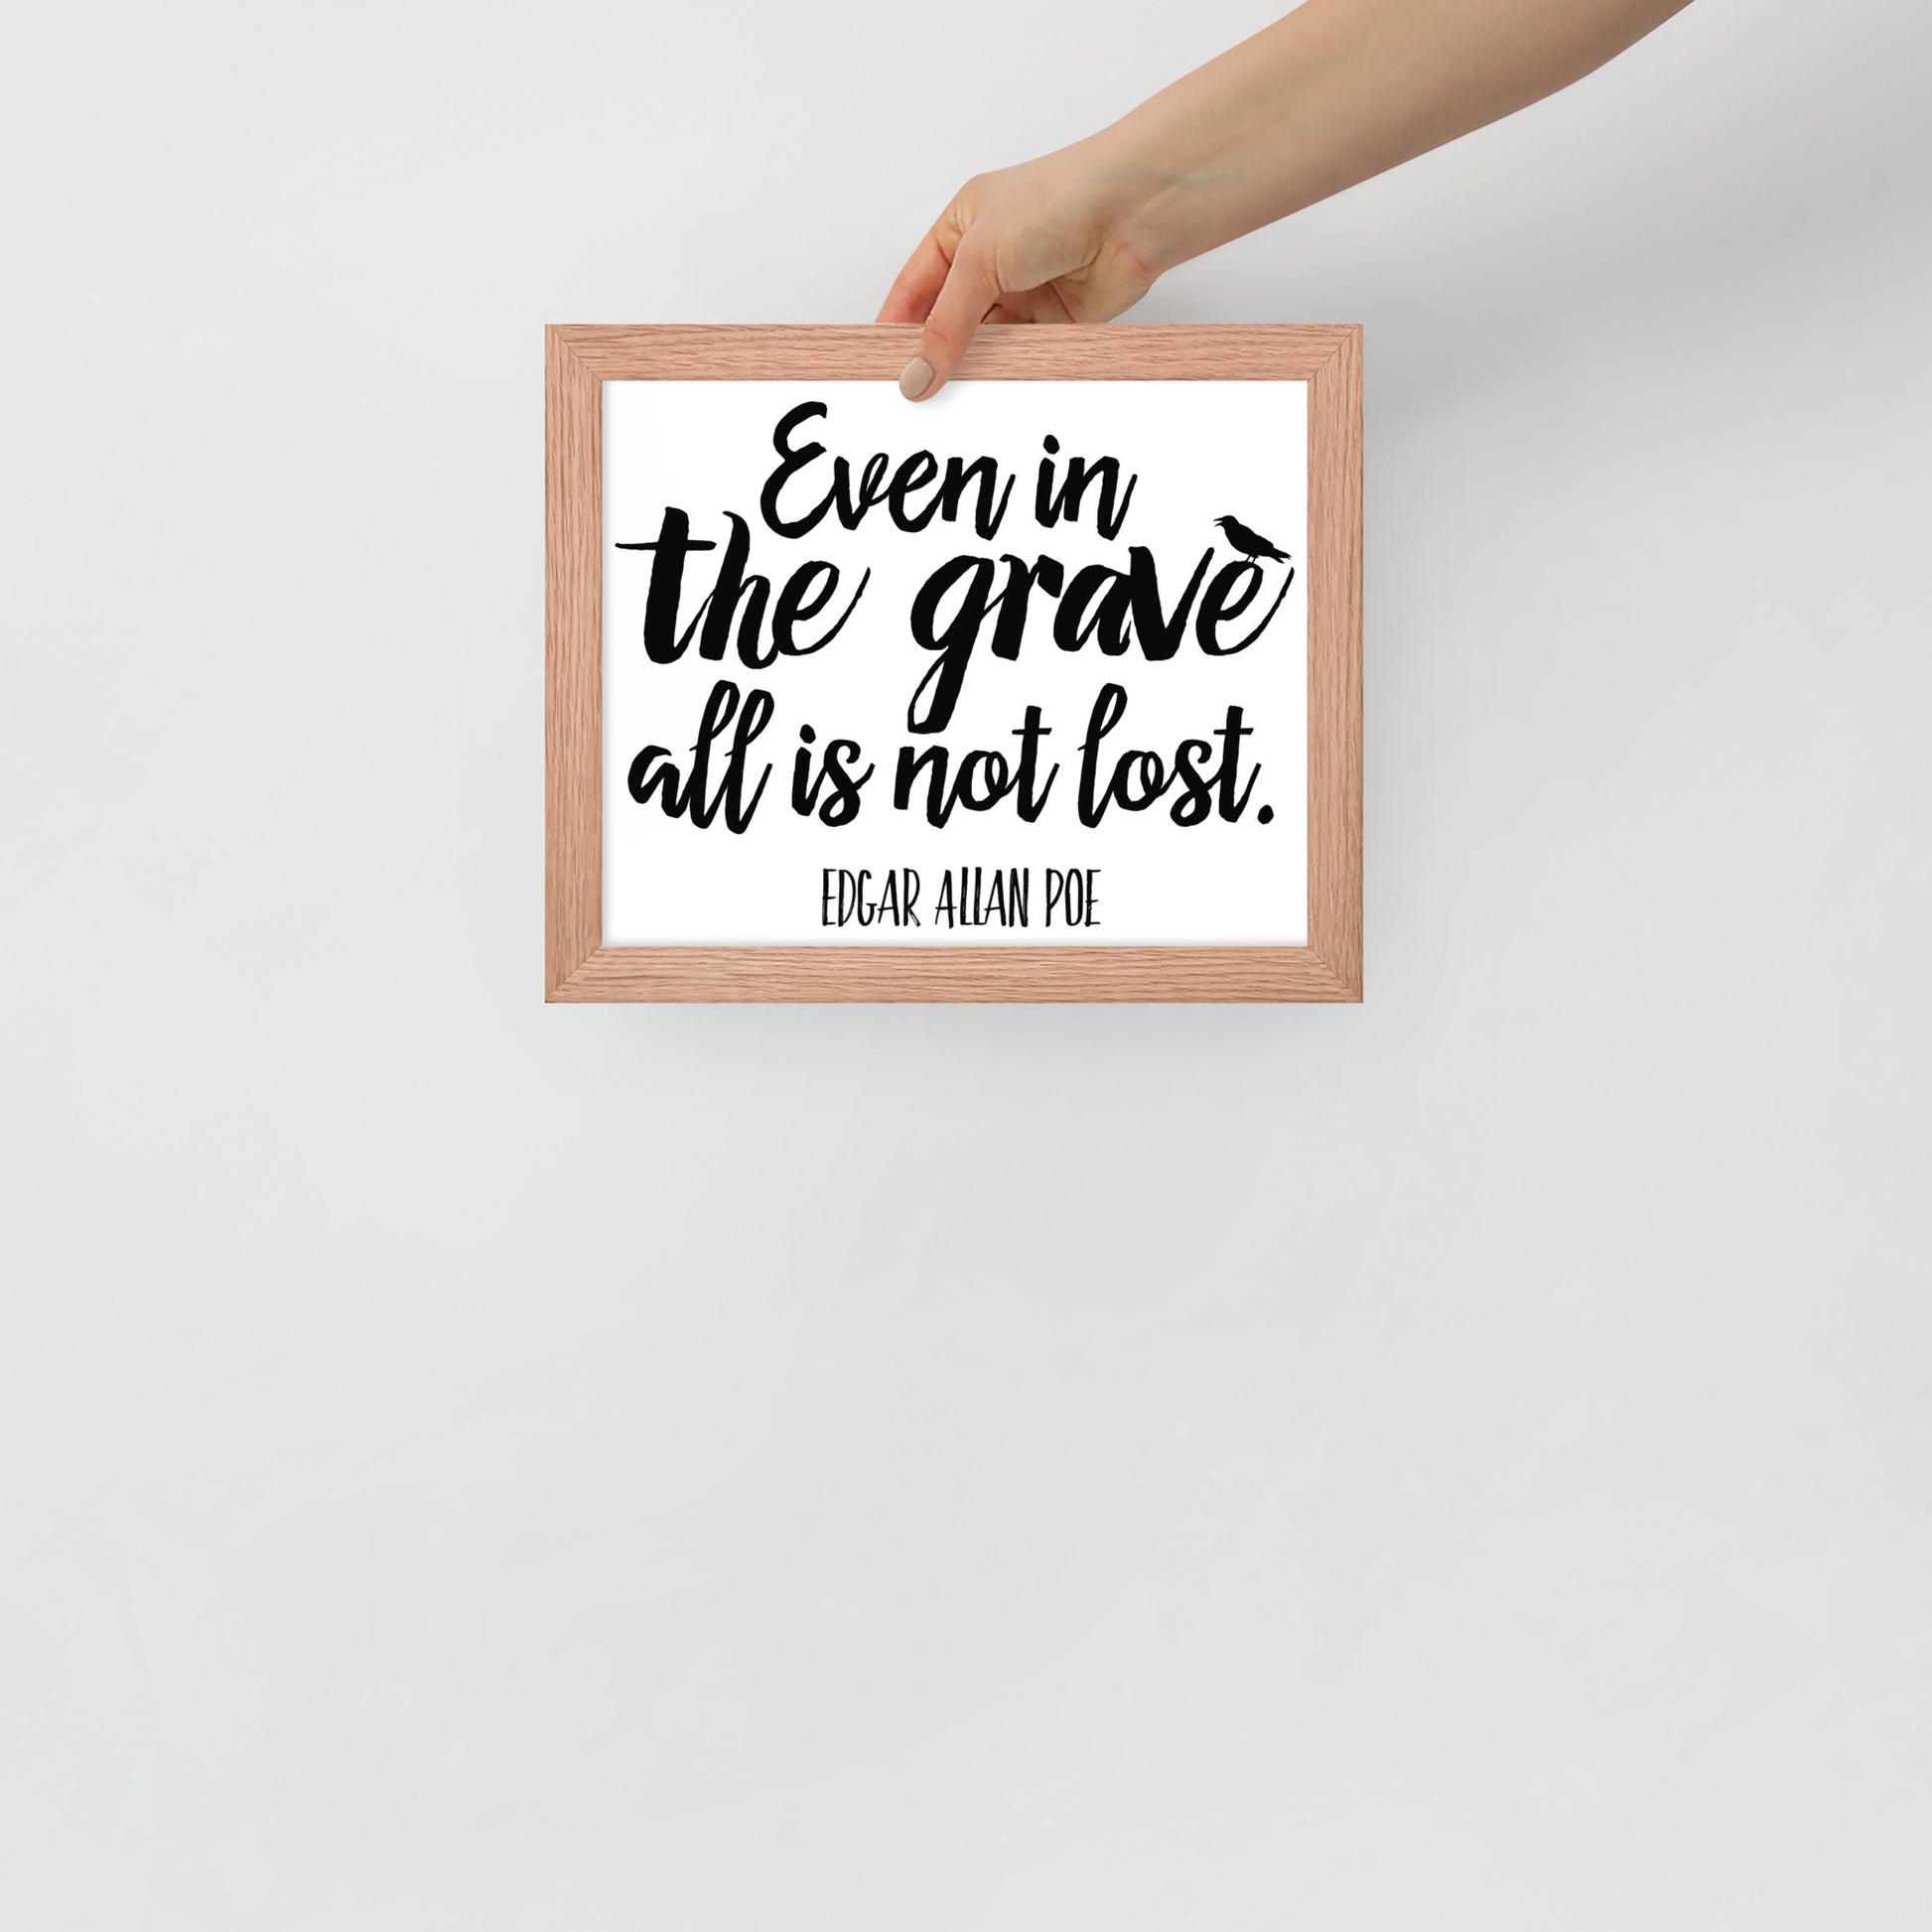 Even in the Grave - Edgar Allan Poe Quote Framed Poster - 8 x 10 Red Oak Frame